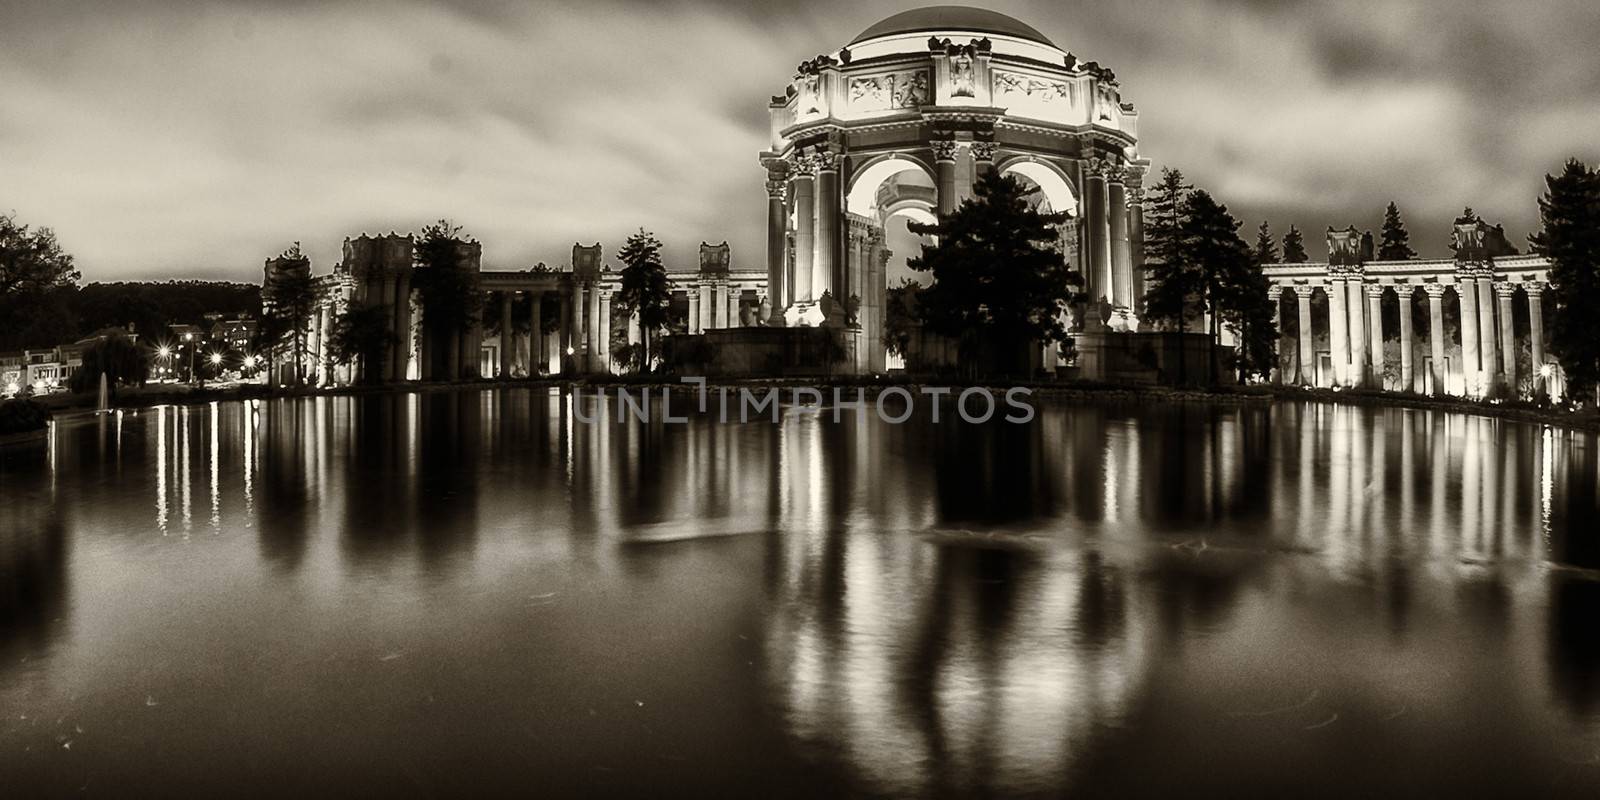 Reflection of a museum on water, Palace Of Fine Arts, Marina District, San Francisco, California, USA